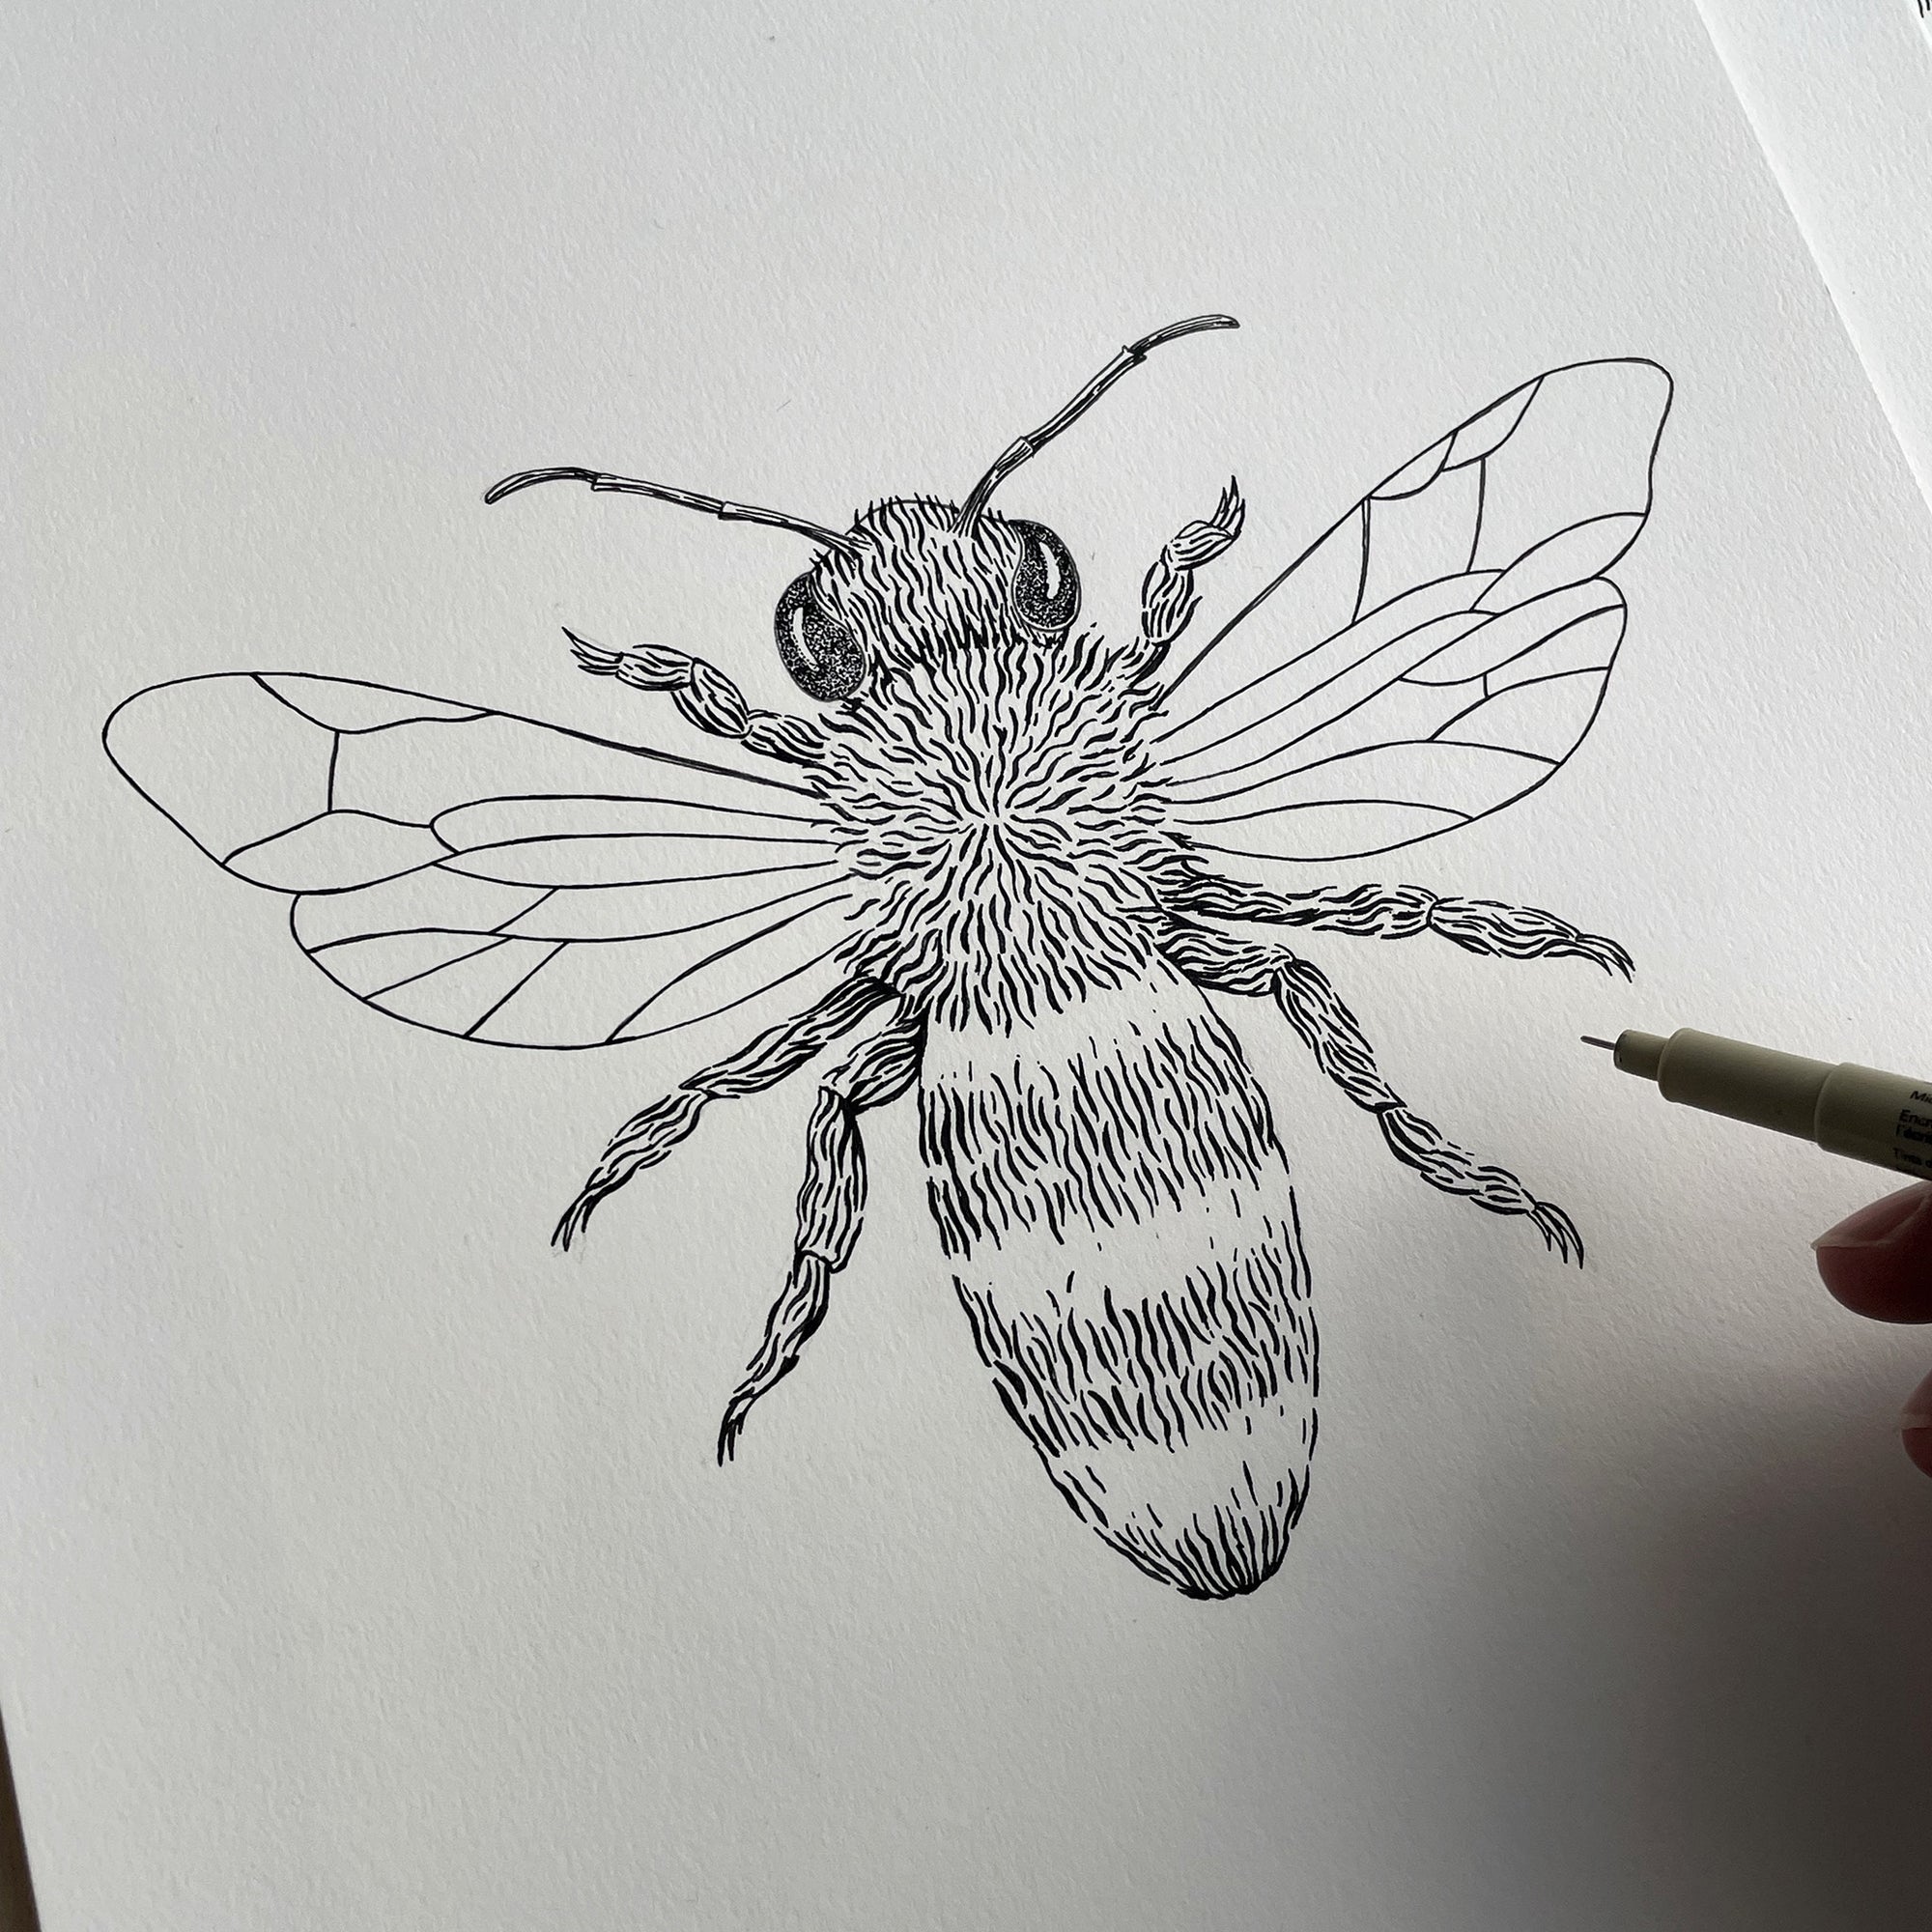 Jan Perit draws a bee illustration for a collaboration with London design studio Wingback